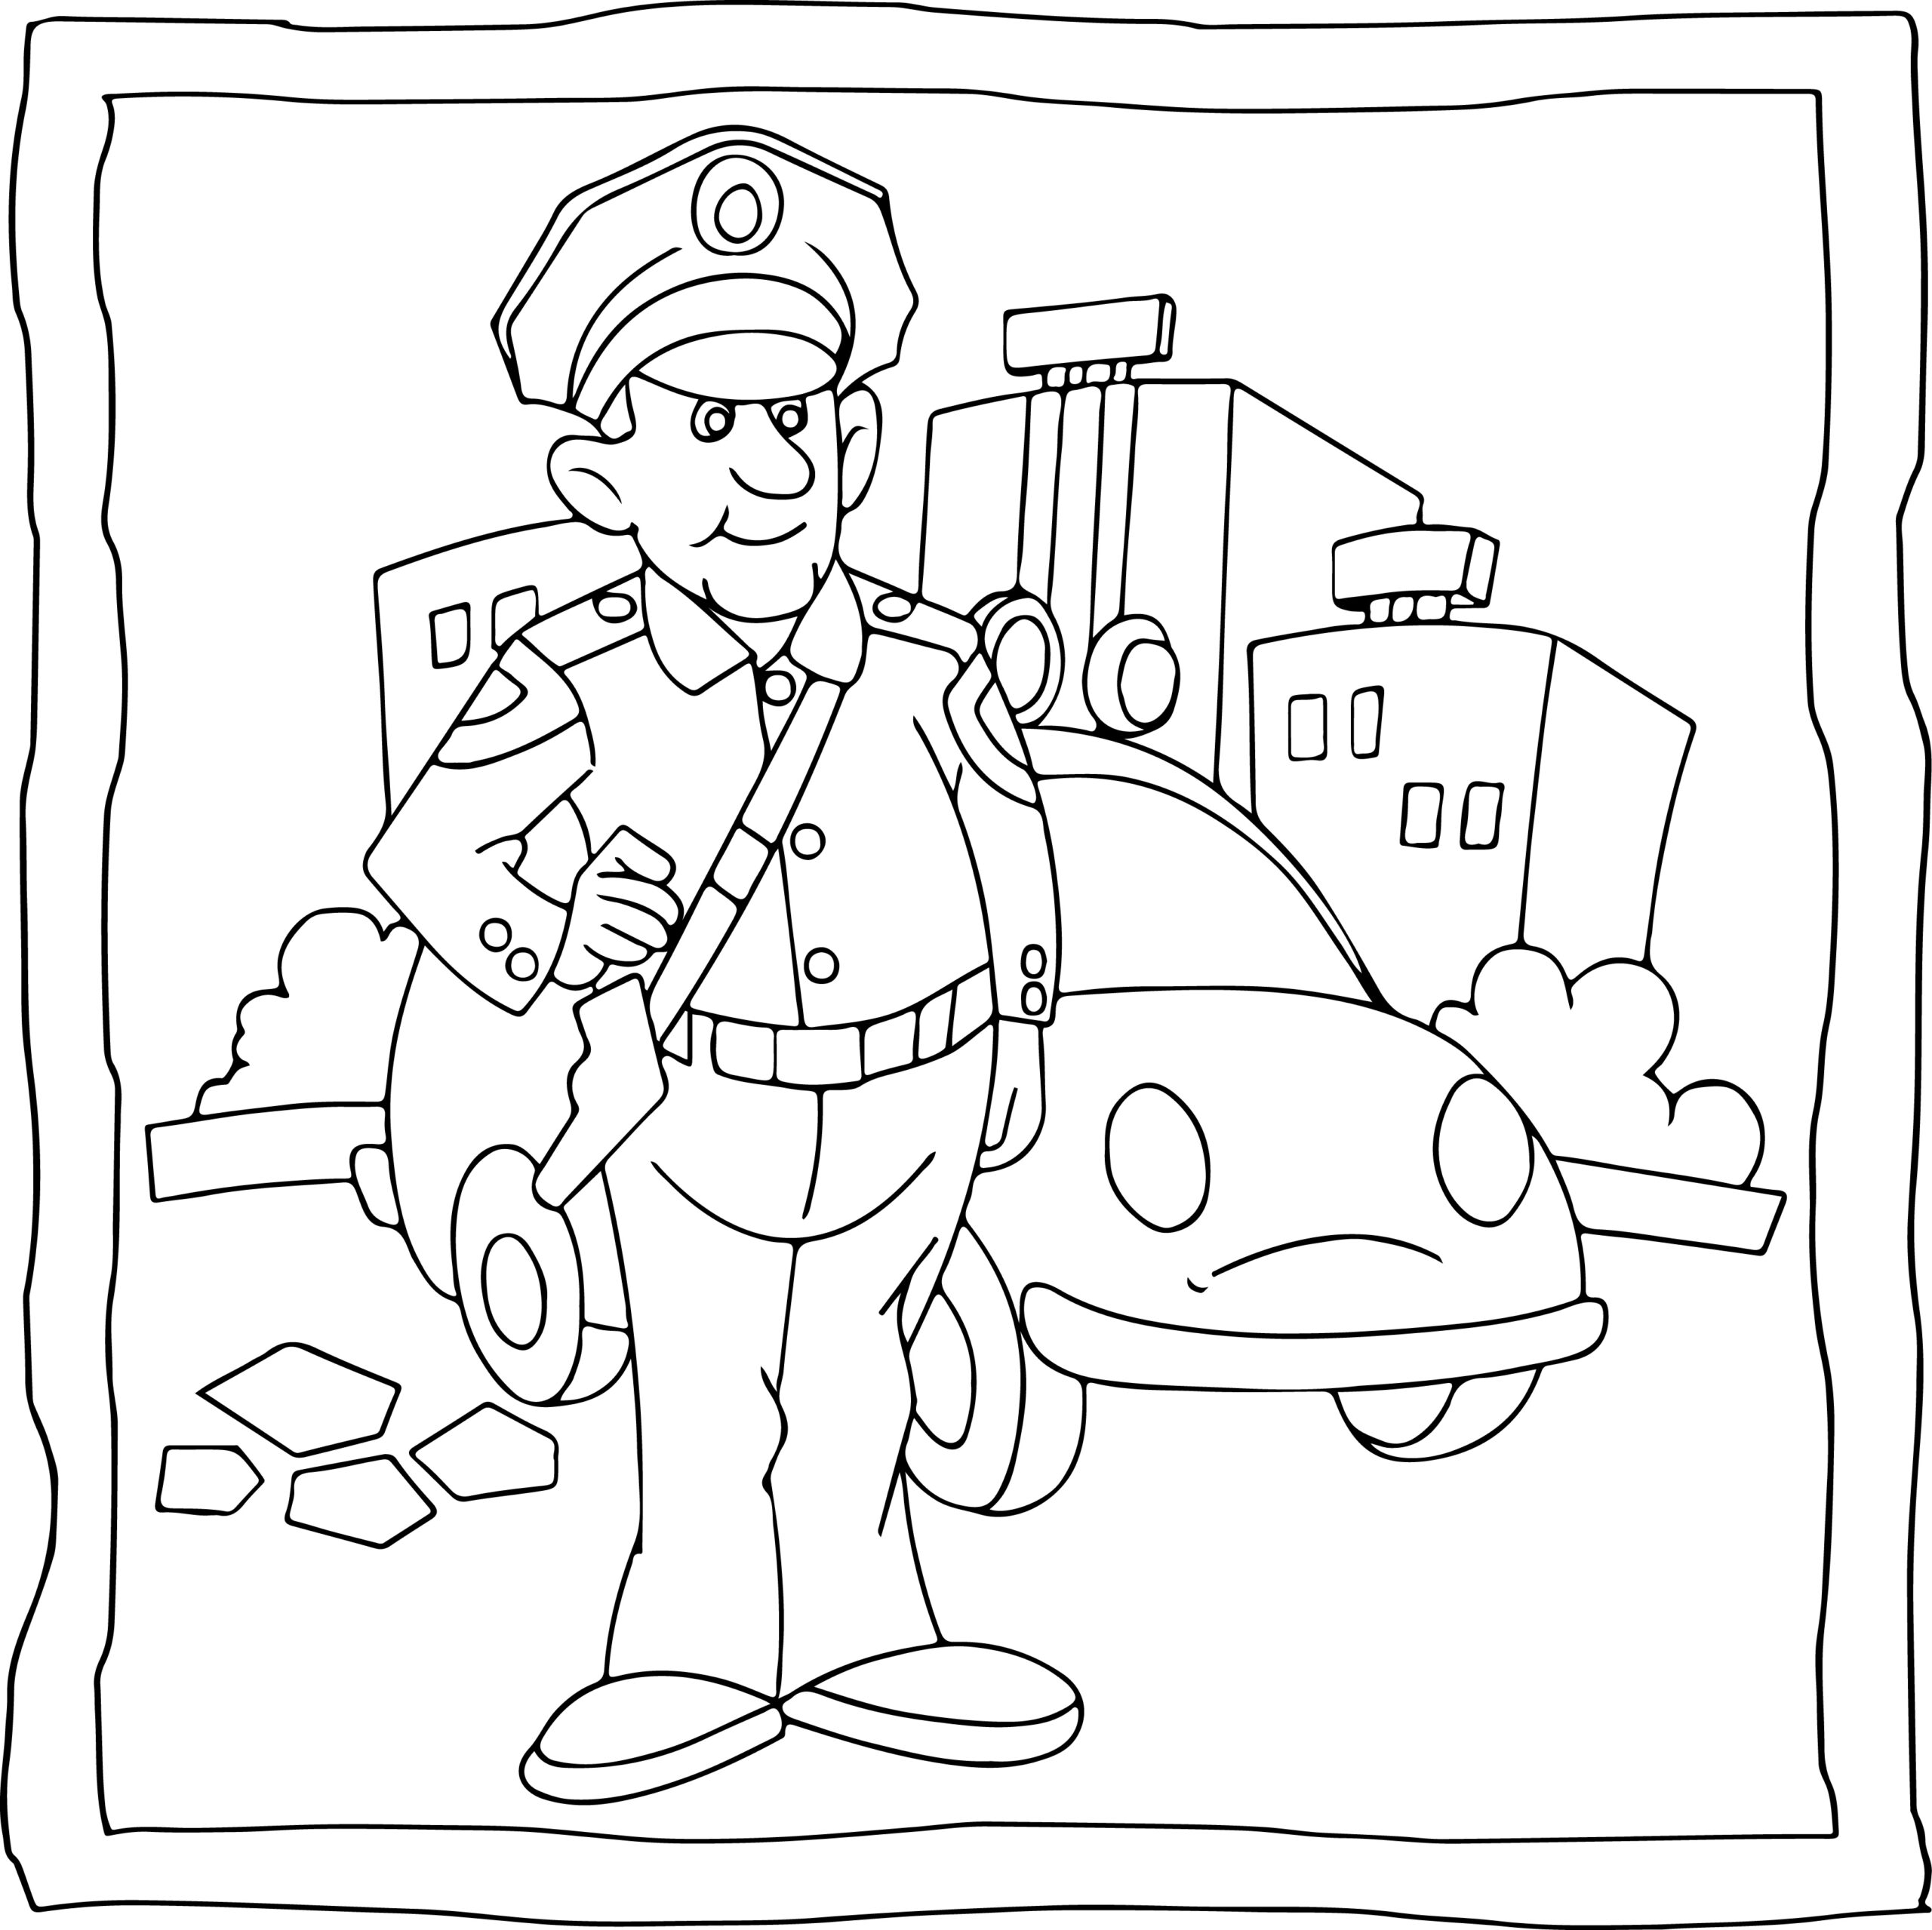 Police coloring book easy and fun police coloring pages for kids made by teachers